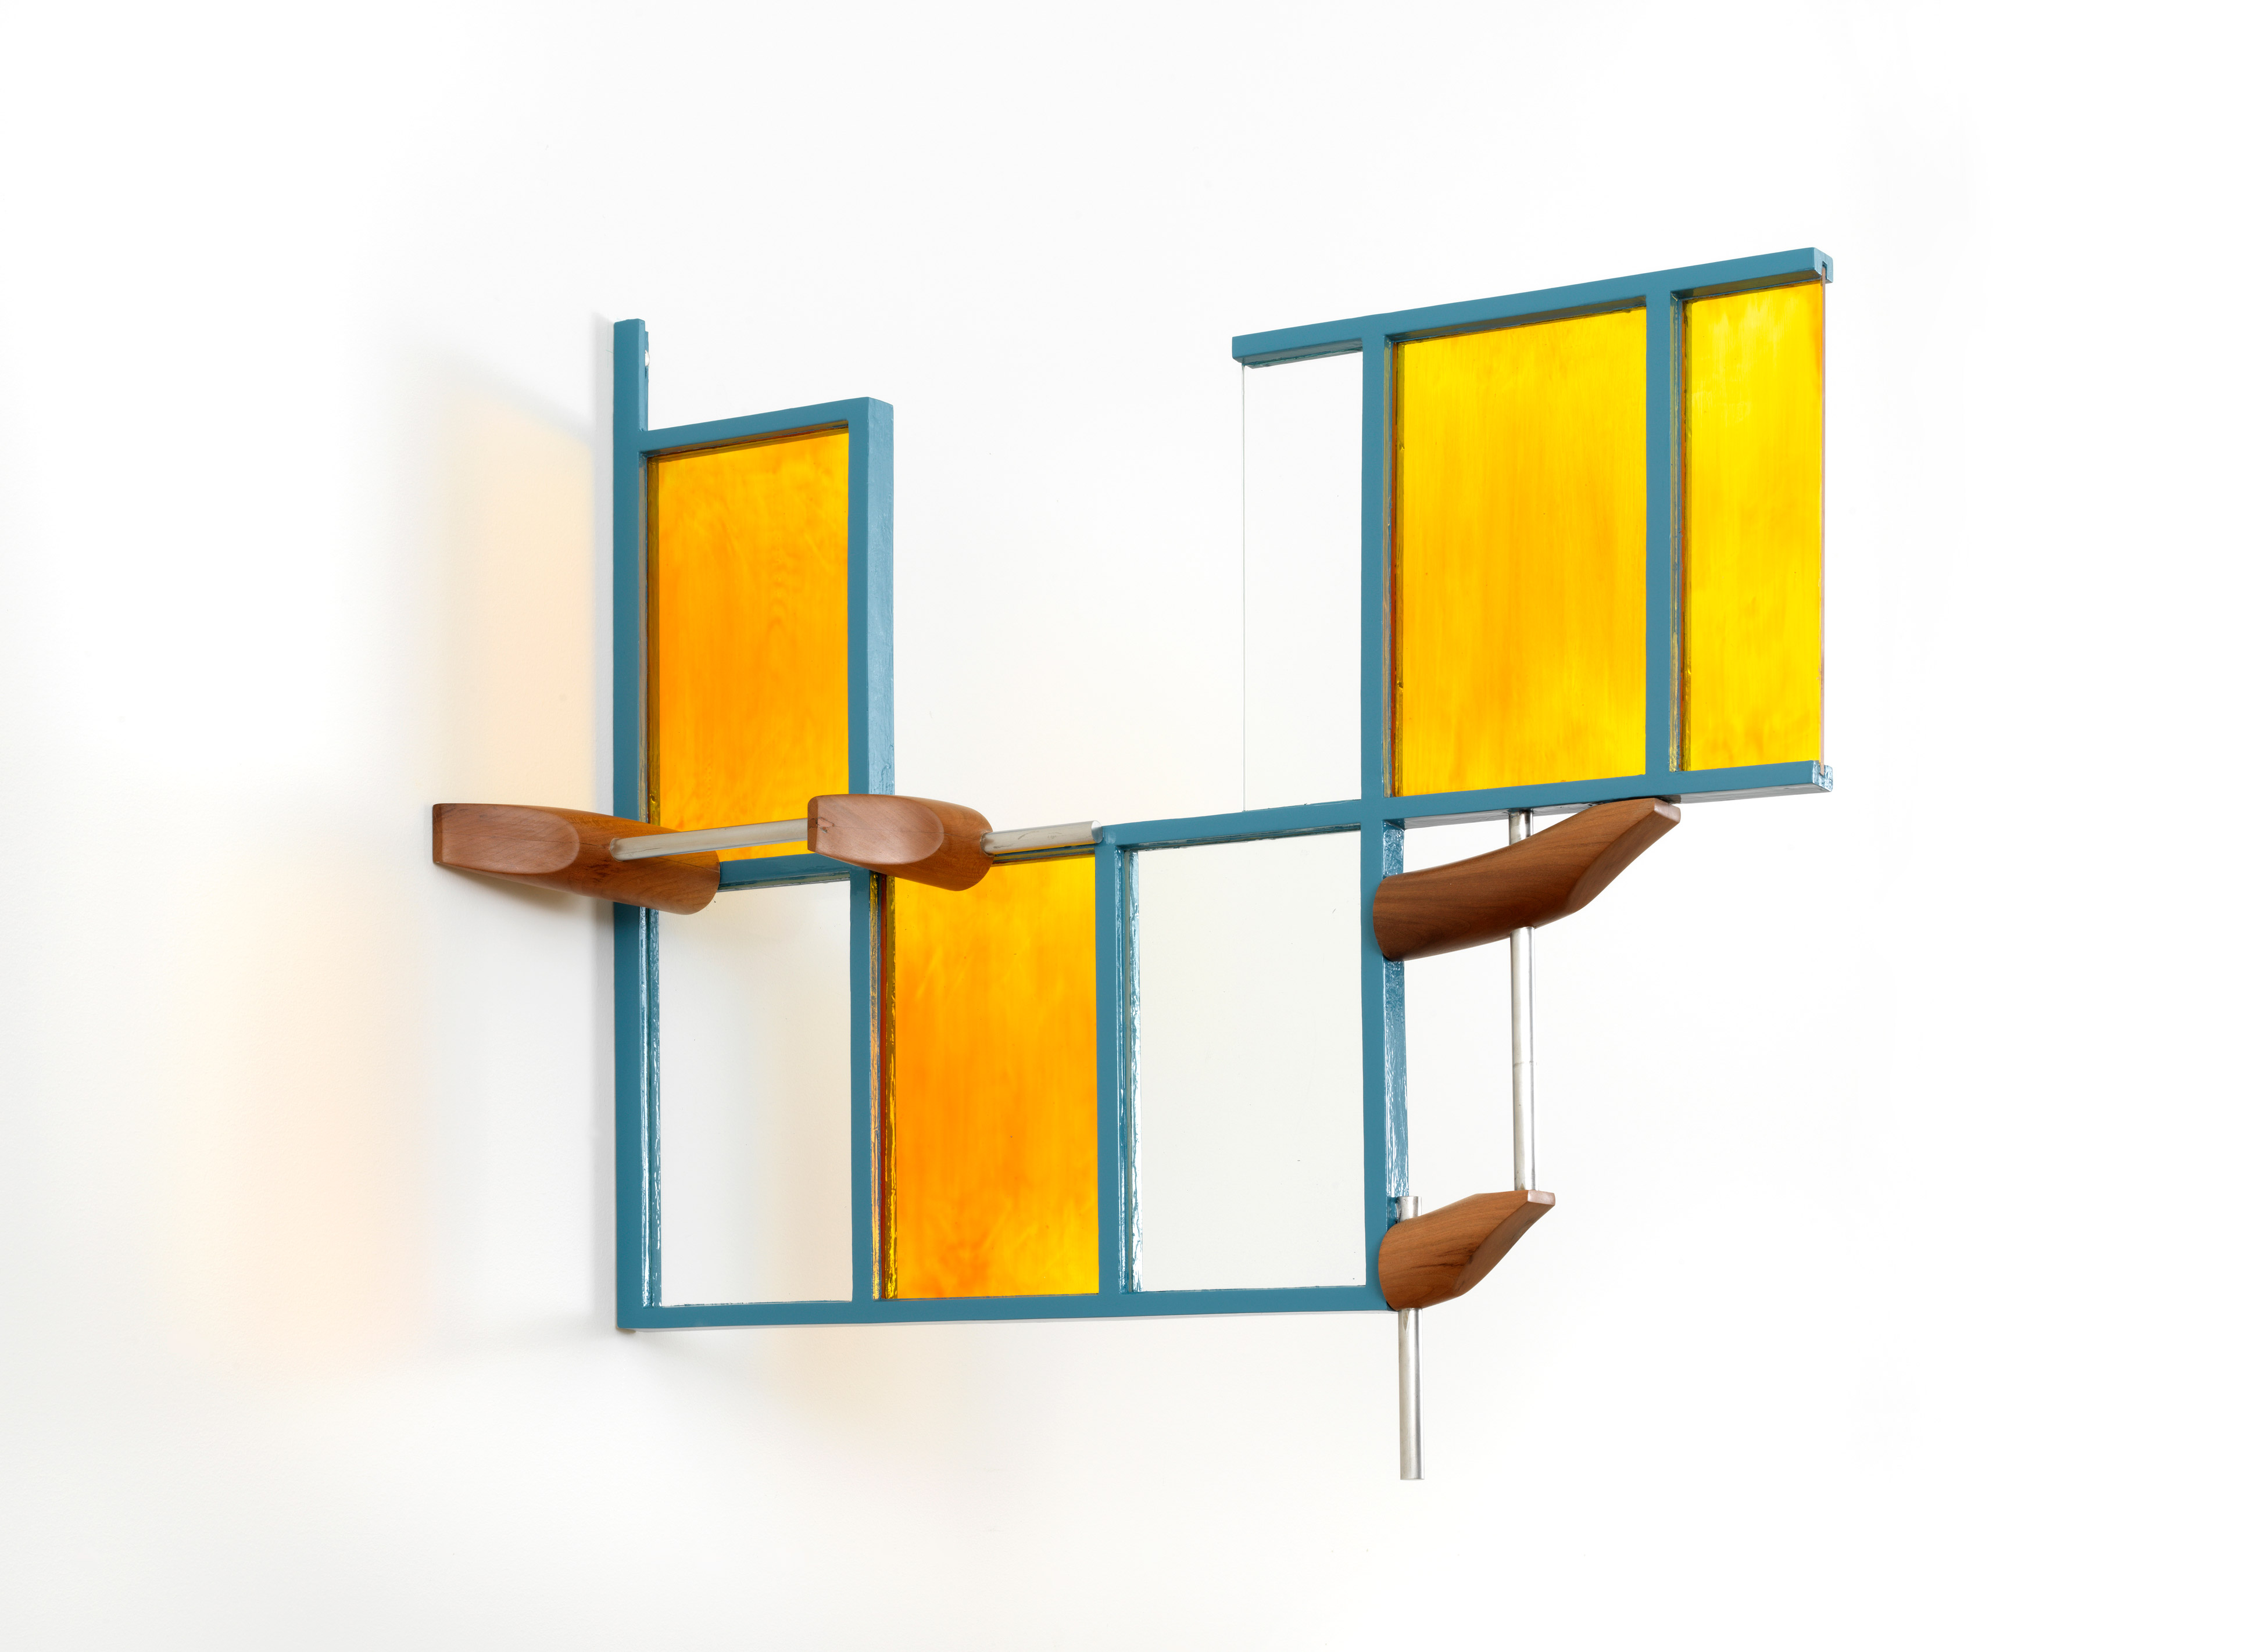 Sculpture of clear or gold quadrilaterals framed in blue, with glass rods attached to the sides, piercing curved cherrywood